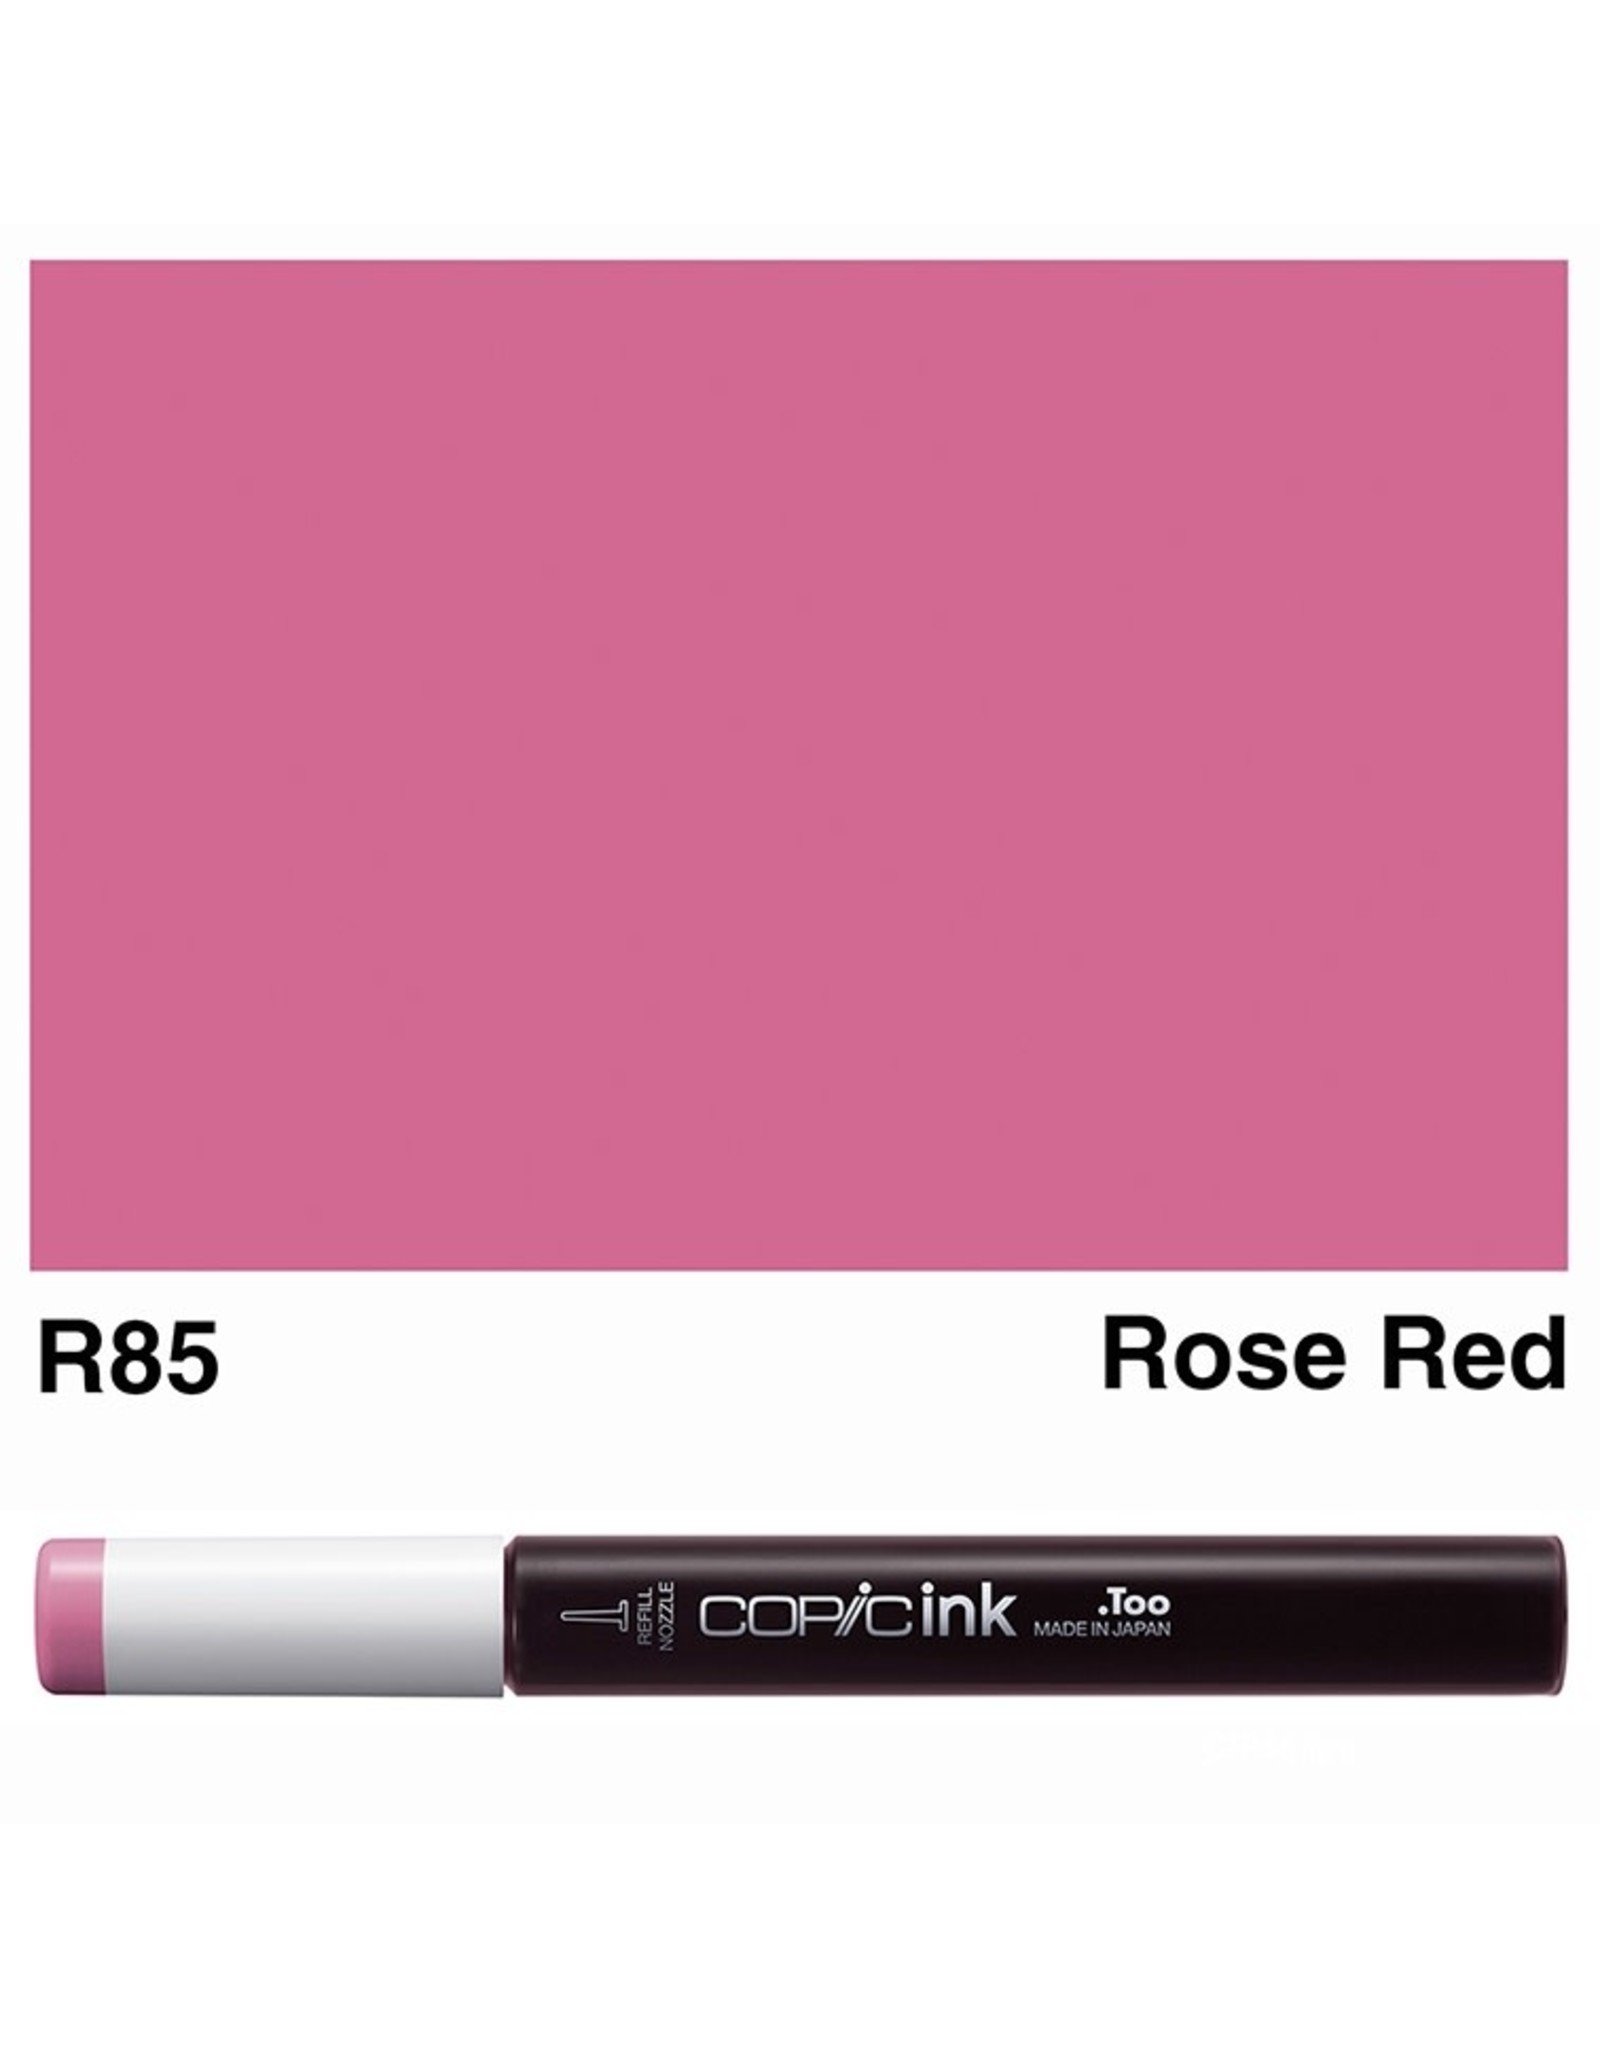 COPIC COPIC R85 ROSE RED REFILL